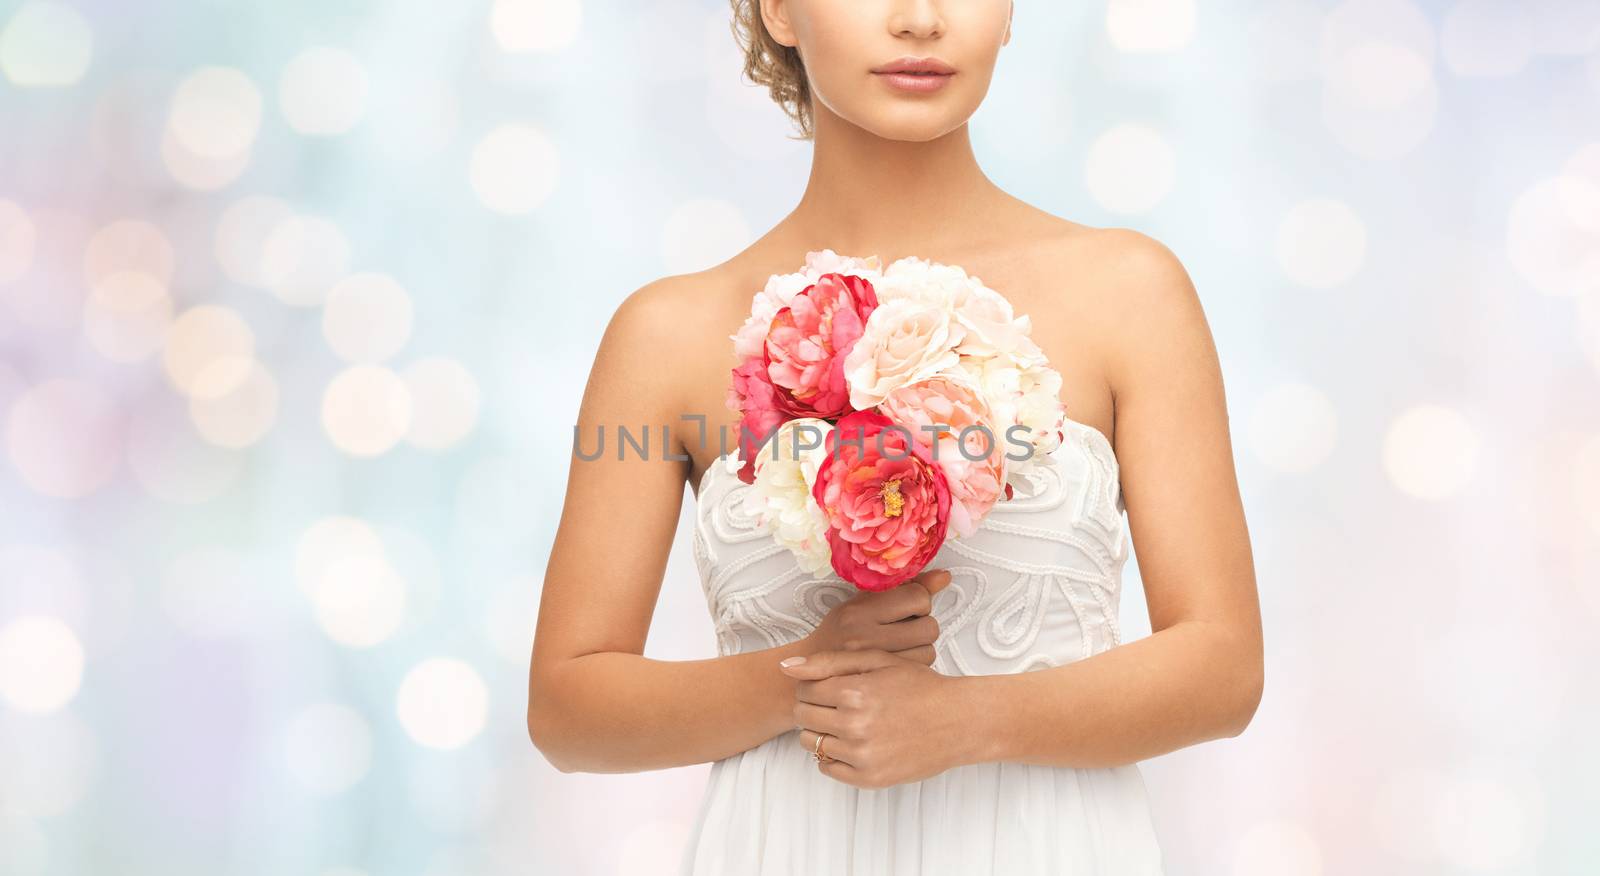 wedding, holidays, people and celebration concept- bride or woman with bouquet of flowers over blue holidays lights background